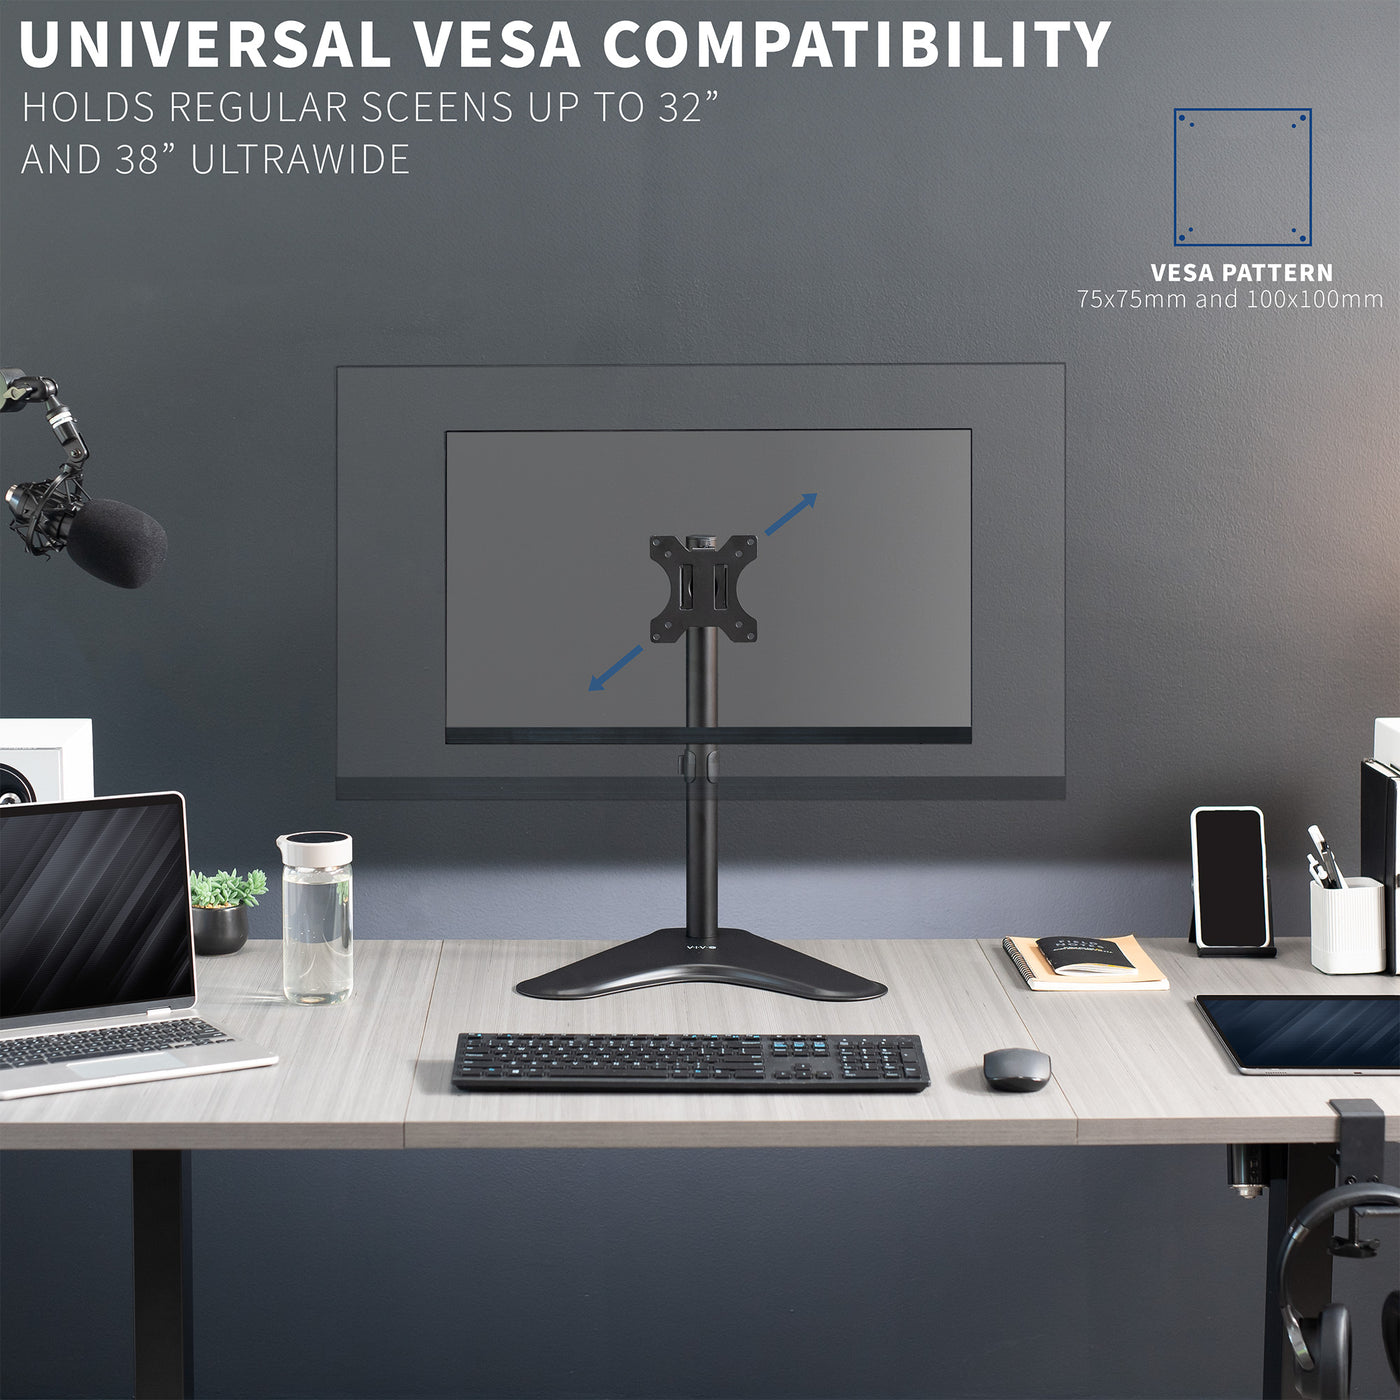 Universal compatibility, holds regular screens up to 32" and 38" ultrawide